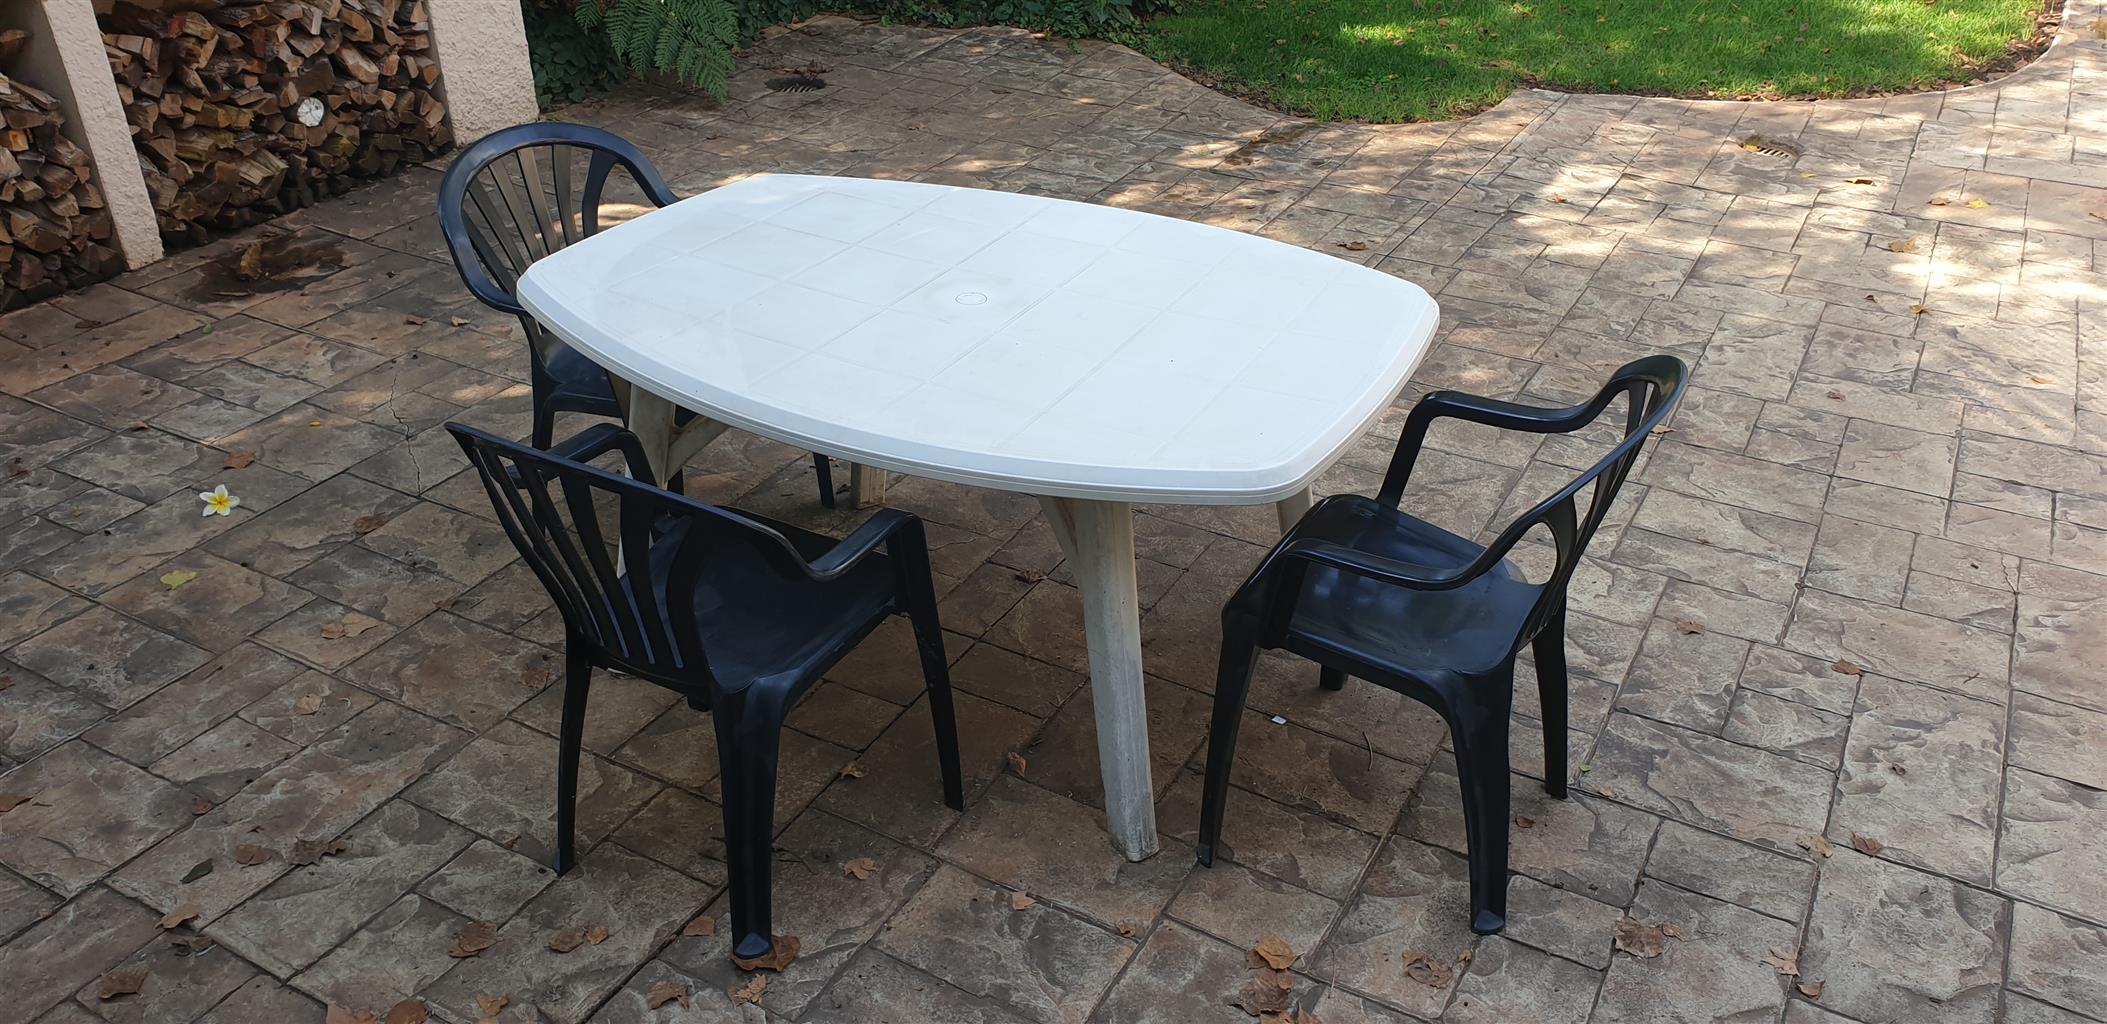 Outdoor Table with Chairs | Junk Mail